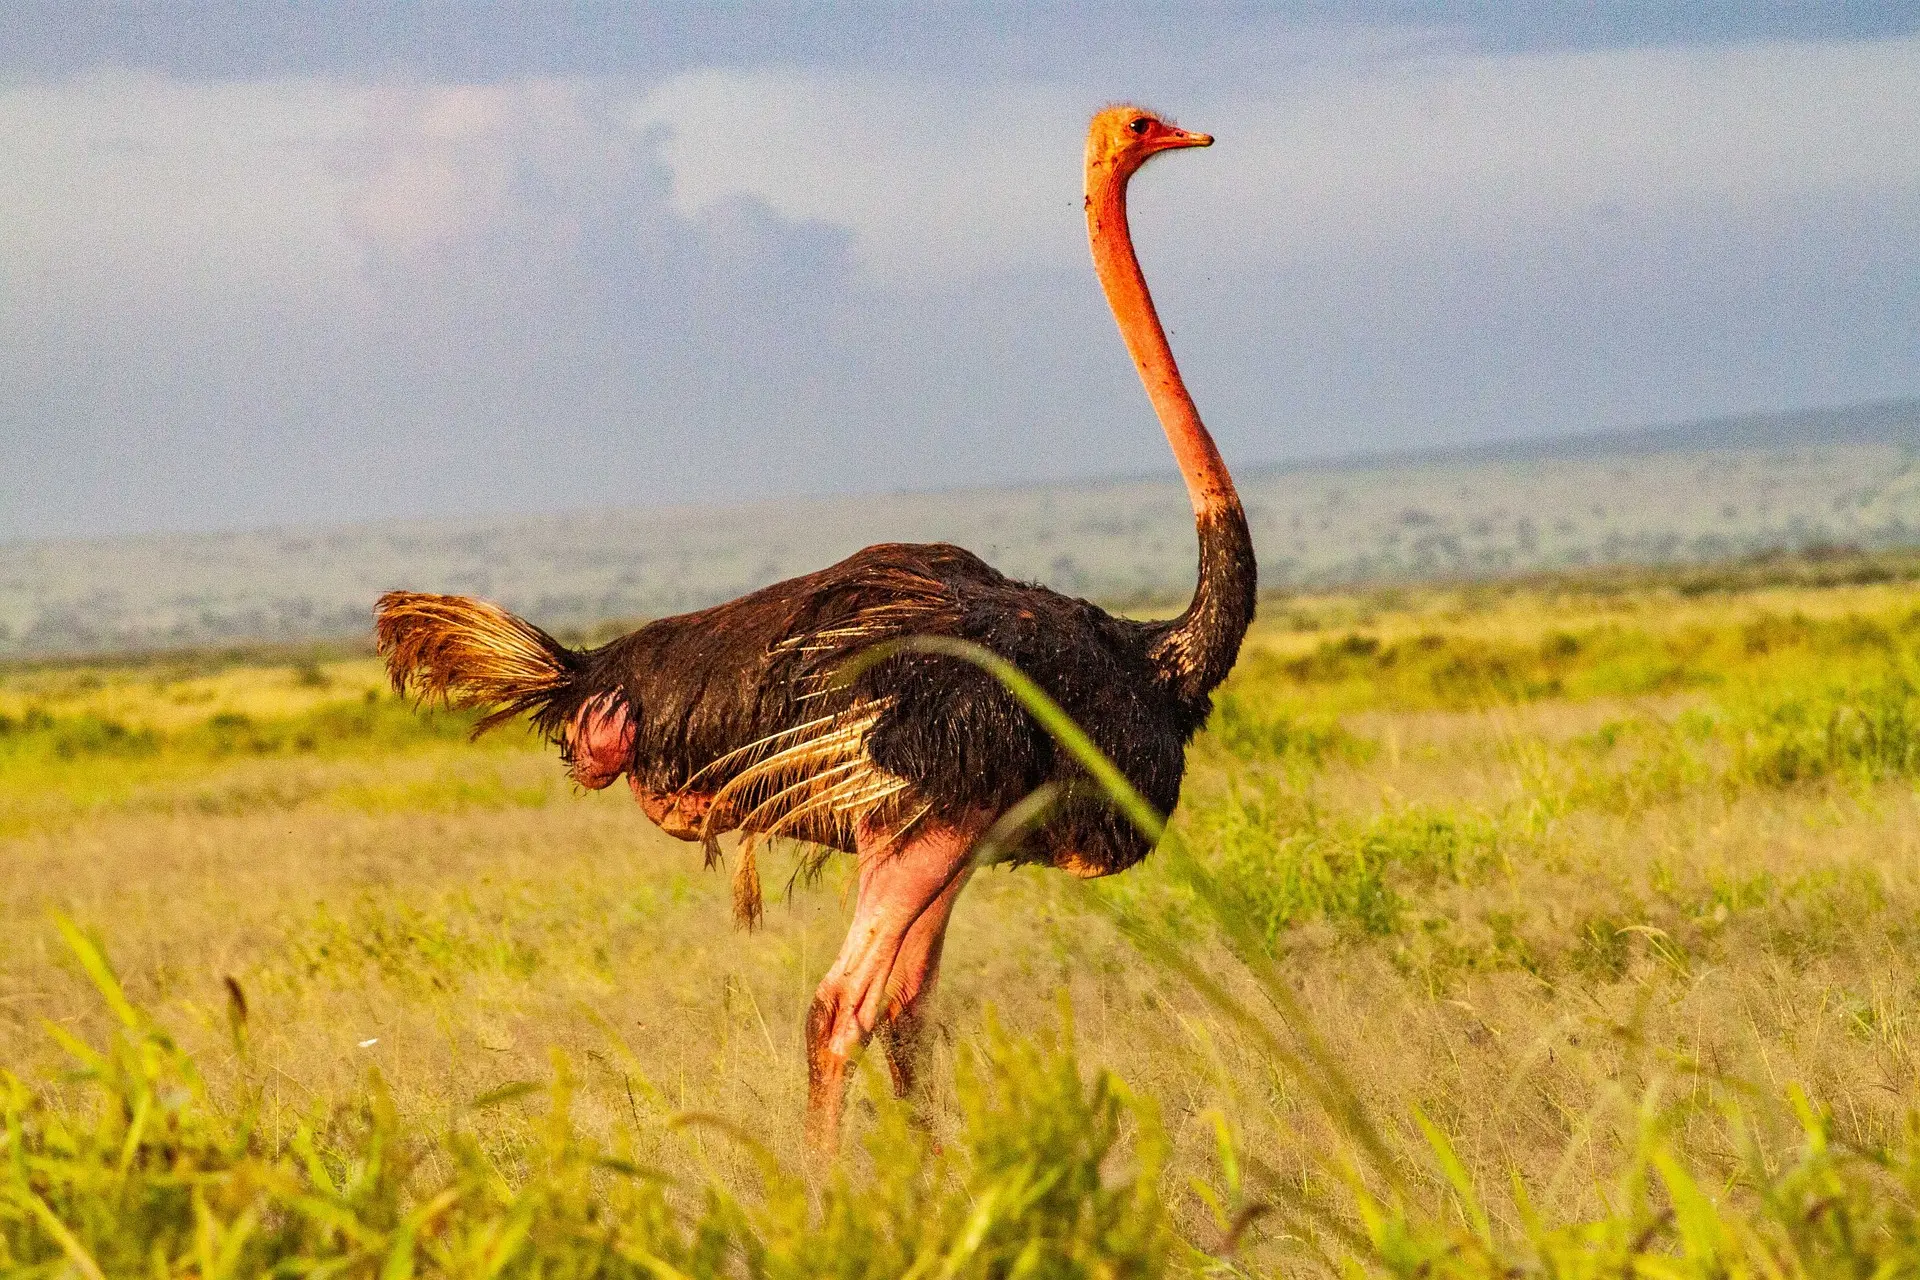 Ostrich spotted in Serengeti National Park